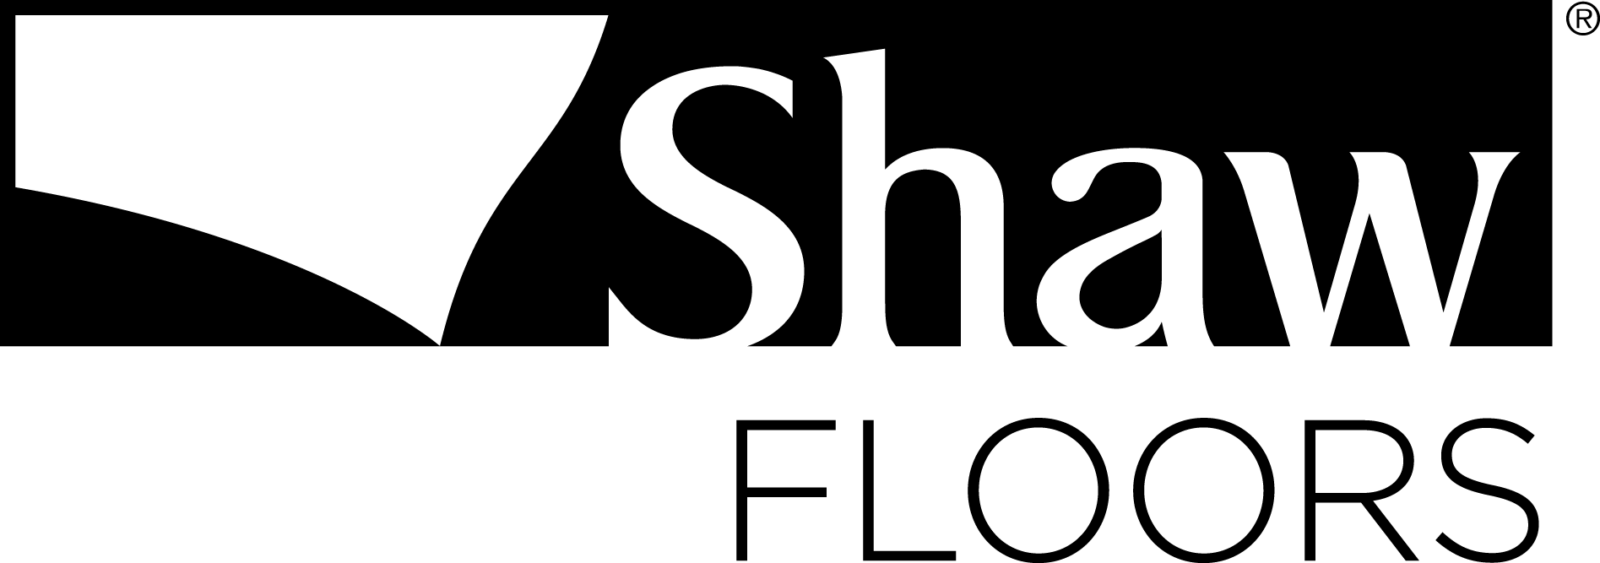 Shaw Floors | Off-Price Carpet Outlet